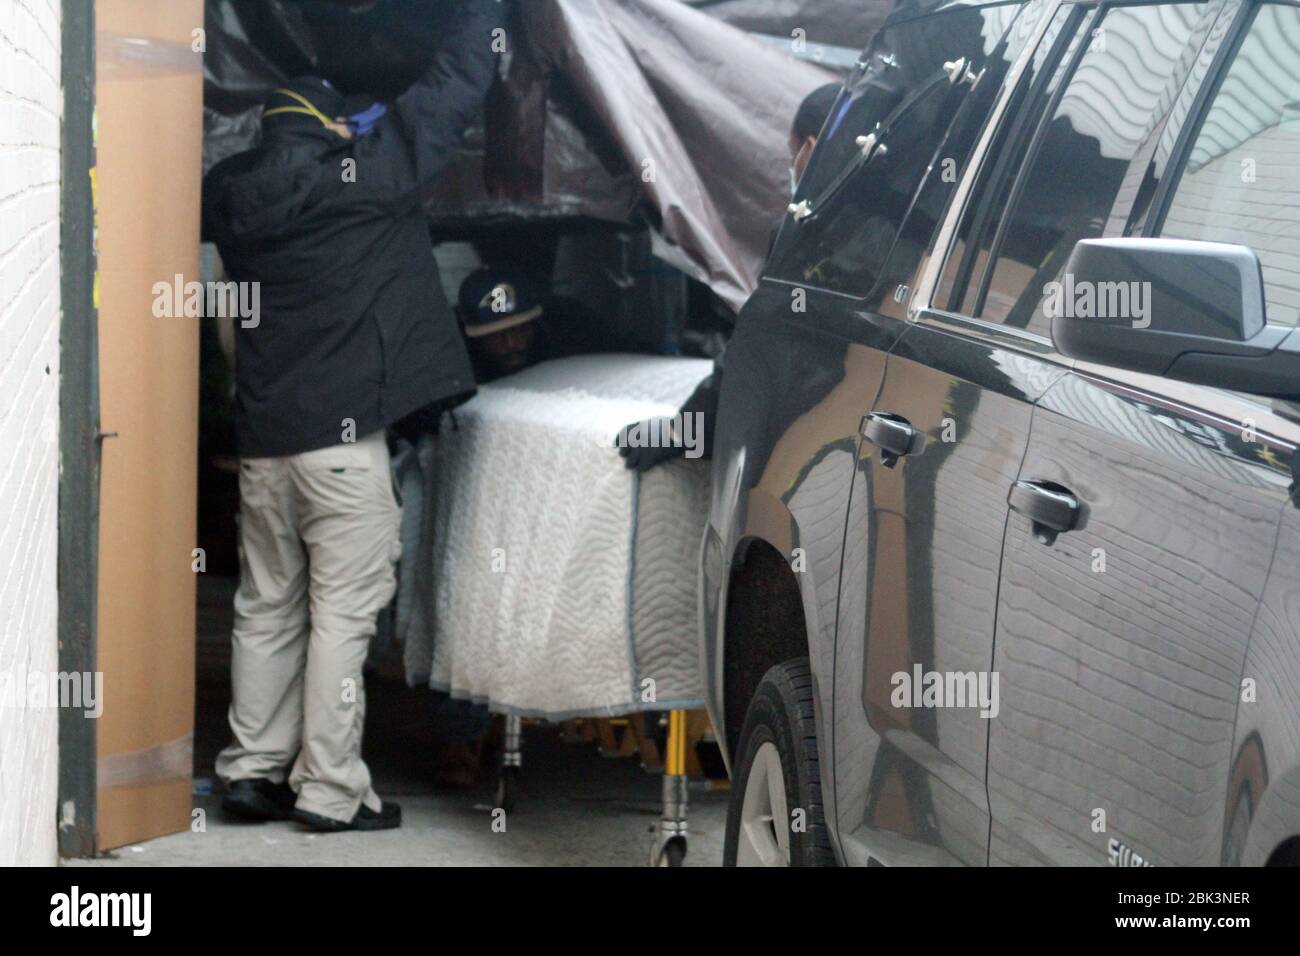 April 30, 2020, New York, New York, USA: An employee in the back pushes on a coffin covered with a white cloth, helped by a mortician while a man lifts a brown tarp set up in front of the Andrew T. Cleckley Funeral Home in Brooklyn where bodies not properly cared are removed. 60 corpses were stored in 4 rented vehiciles lining the street along stores. Neighbors reported a foul smell and fluids dripping from the trucks. Some remains were also found lying on the facility's floor. In New York City alone, there have been almost 13,000 COVID-19 deaths. (Credit Image: © Marie Le Ble/ZUMA Wire) Stock Photo